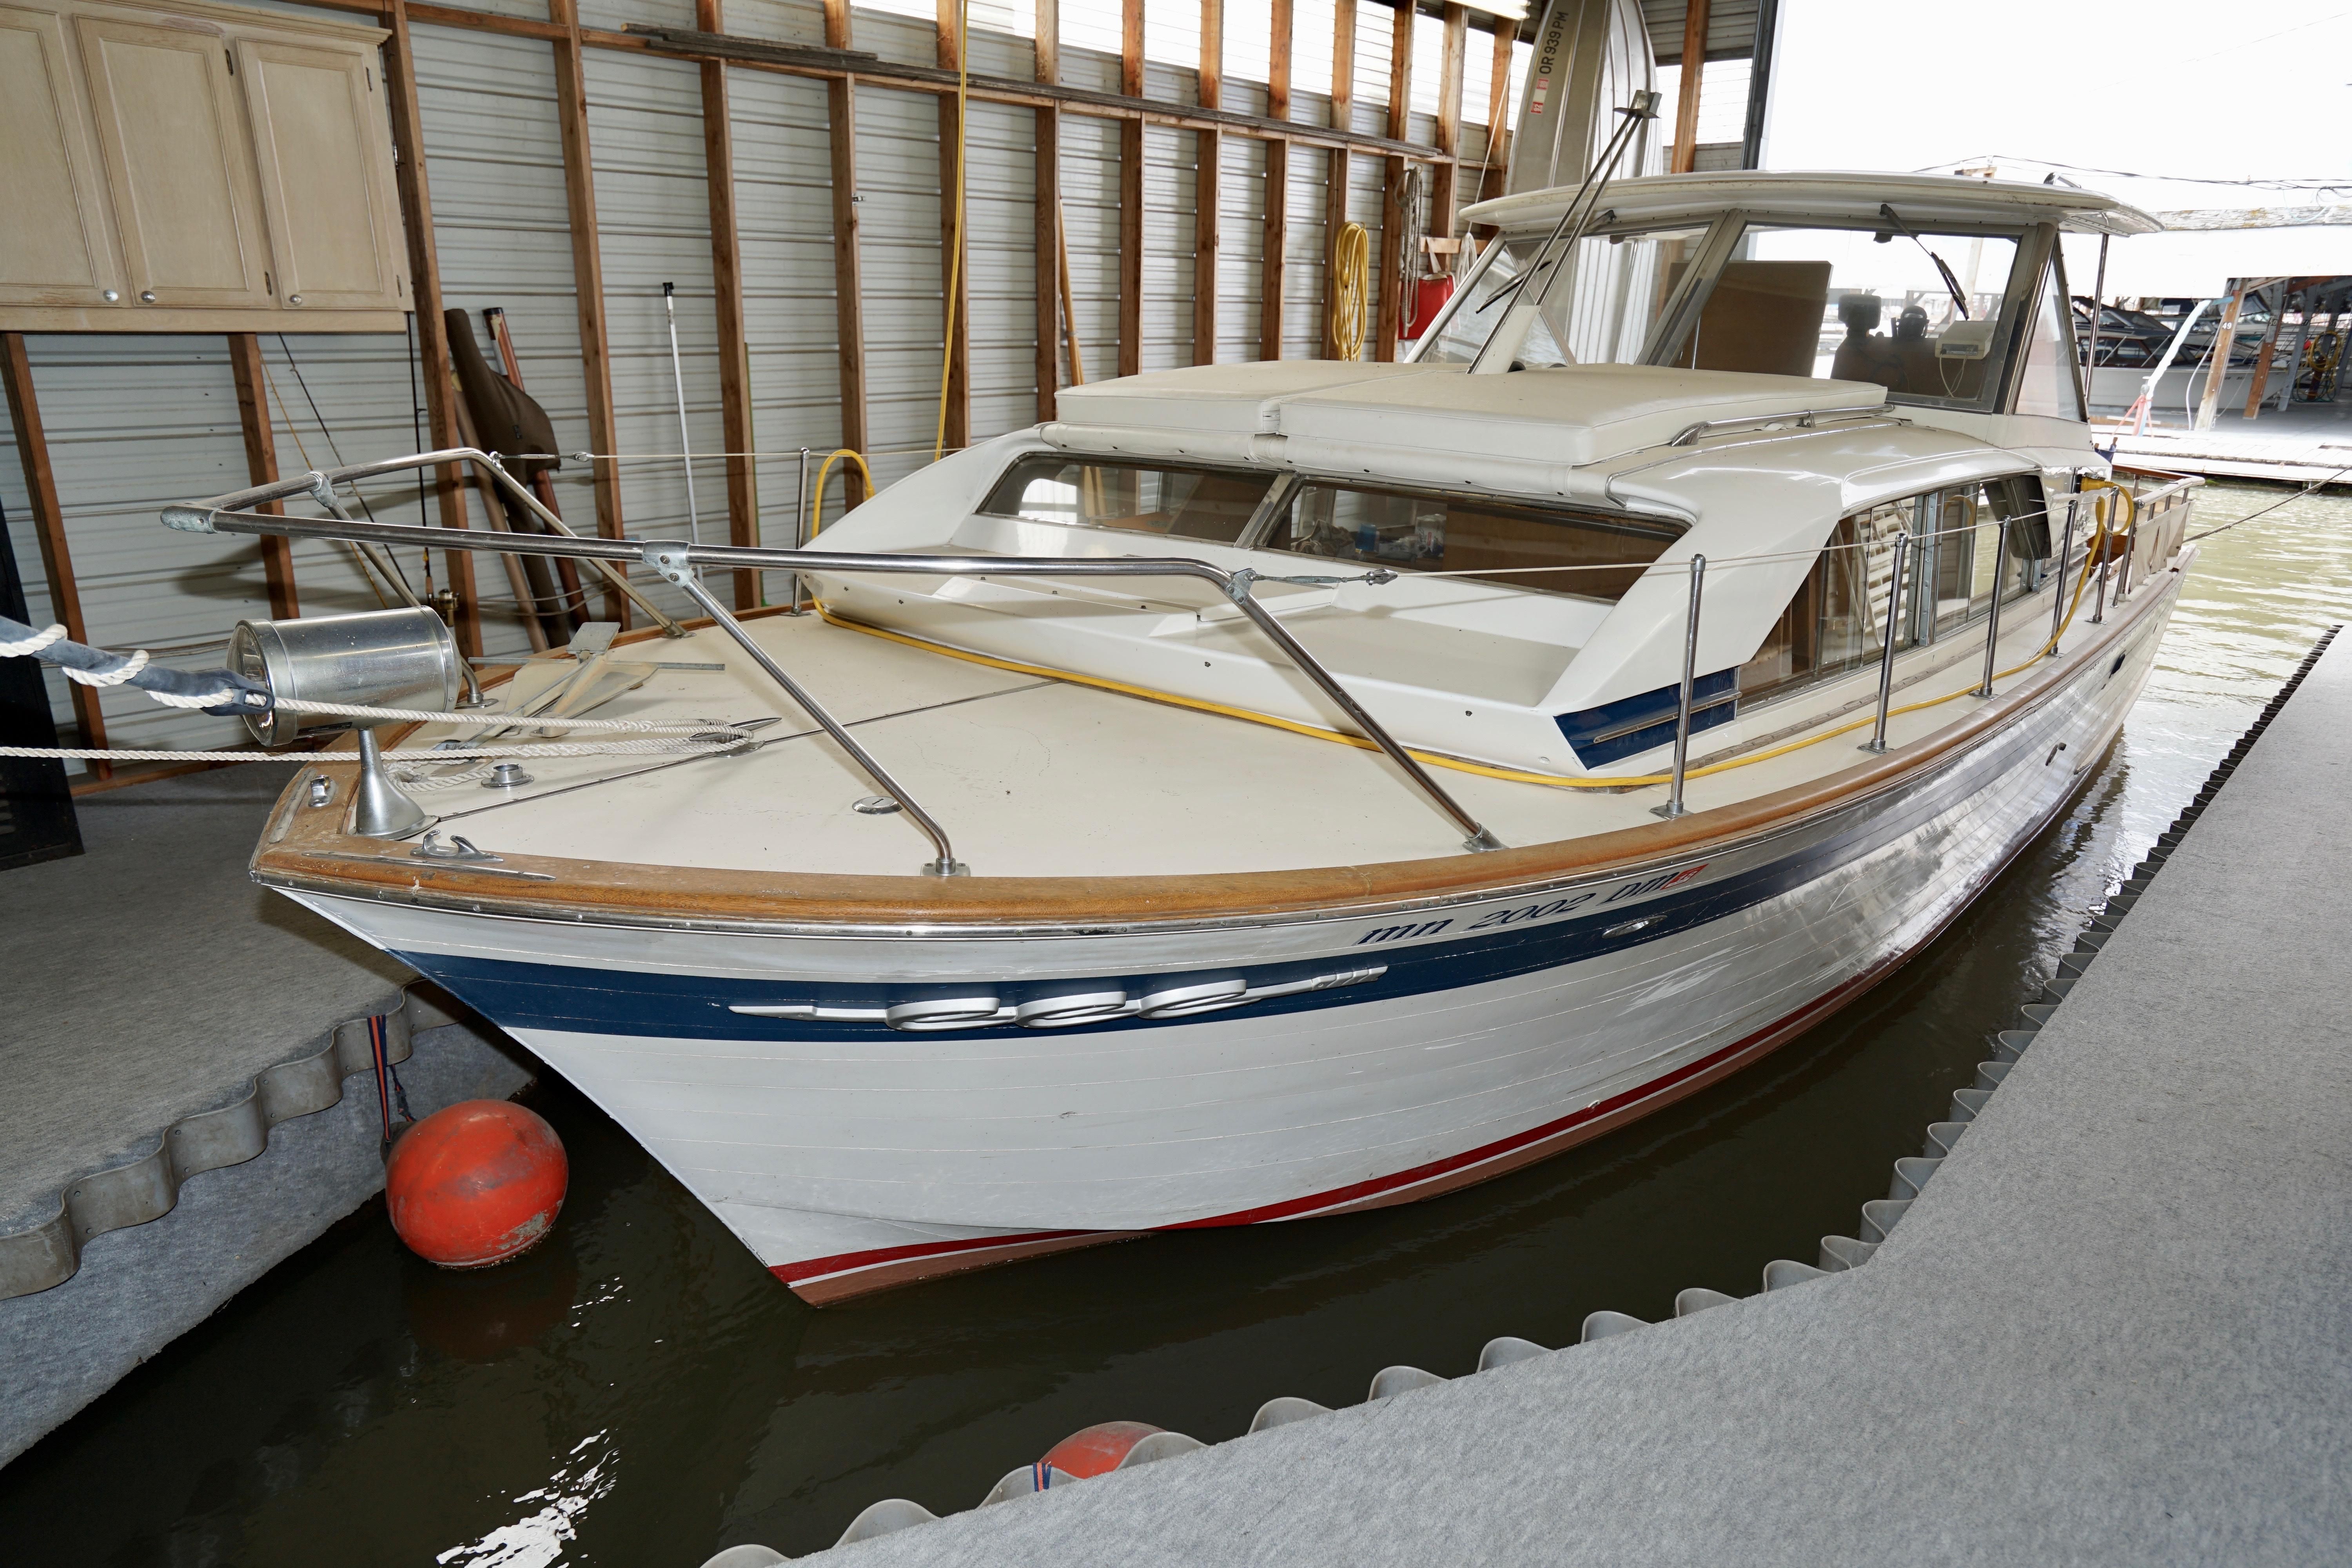 Chris Craft Ski Boat 1959 for sale for $9,500 - Boats-from 